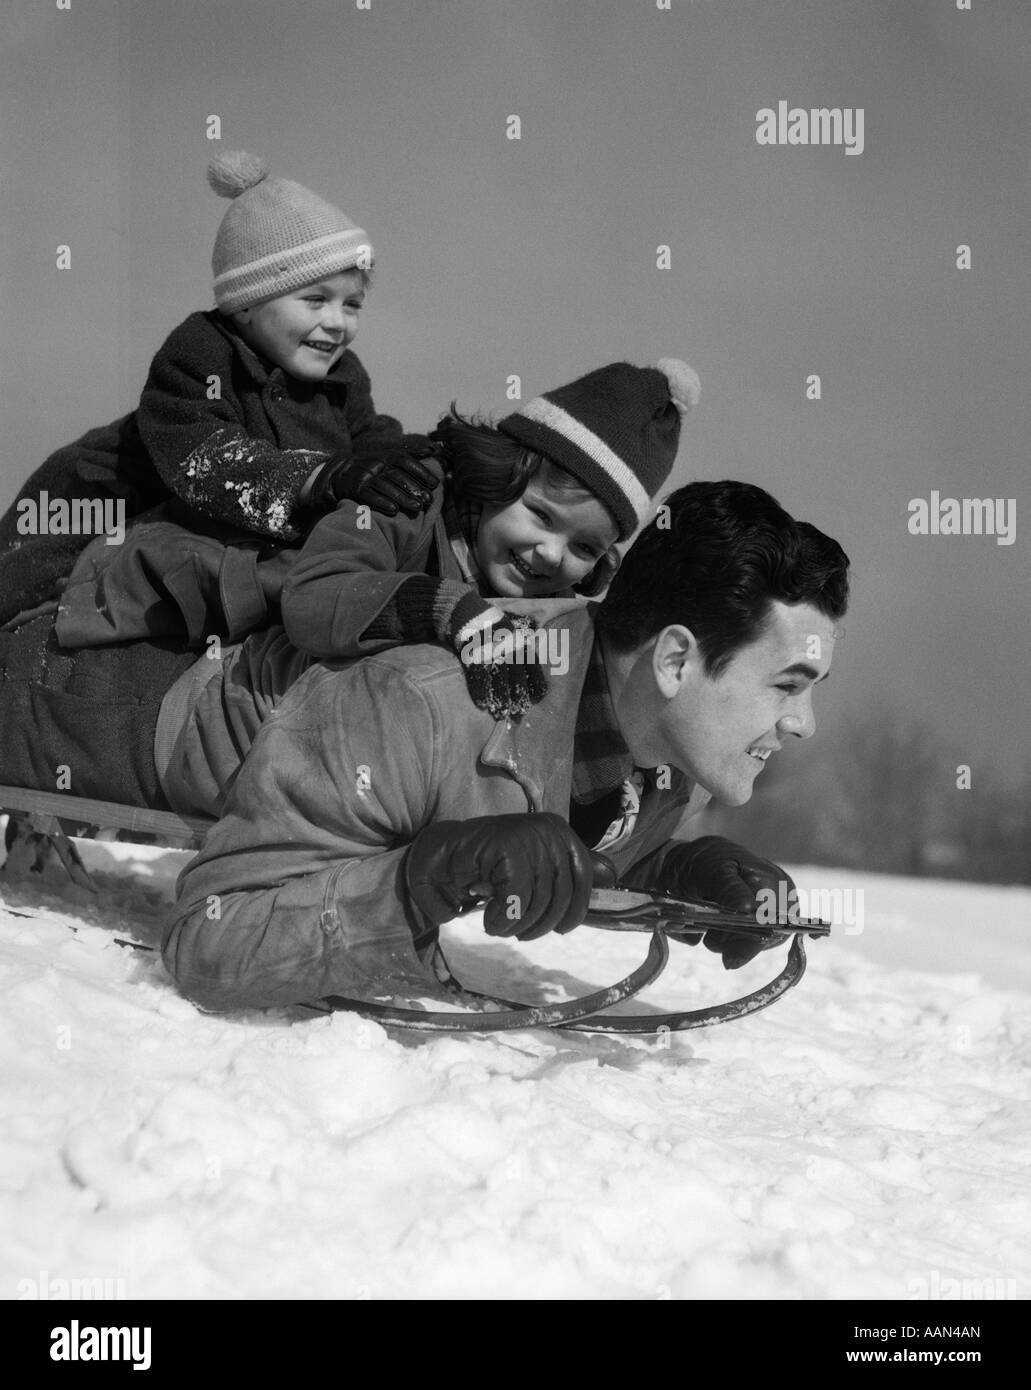 1930s FATHER DAUGHTER AND SON PILED ON SLED GOING DOWNHILL IN SNOW LAUGHING Stock Photo